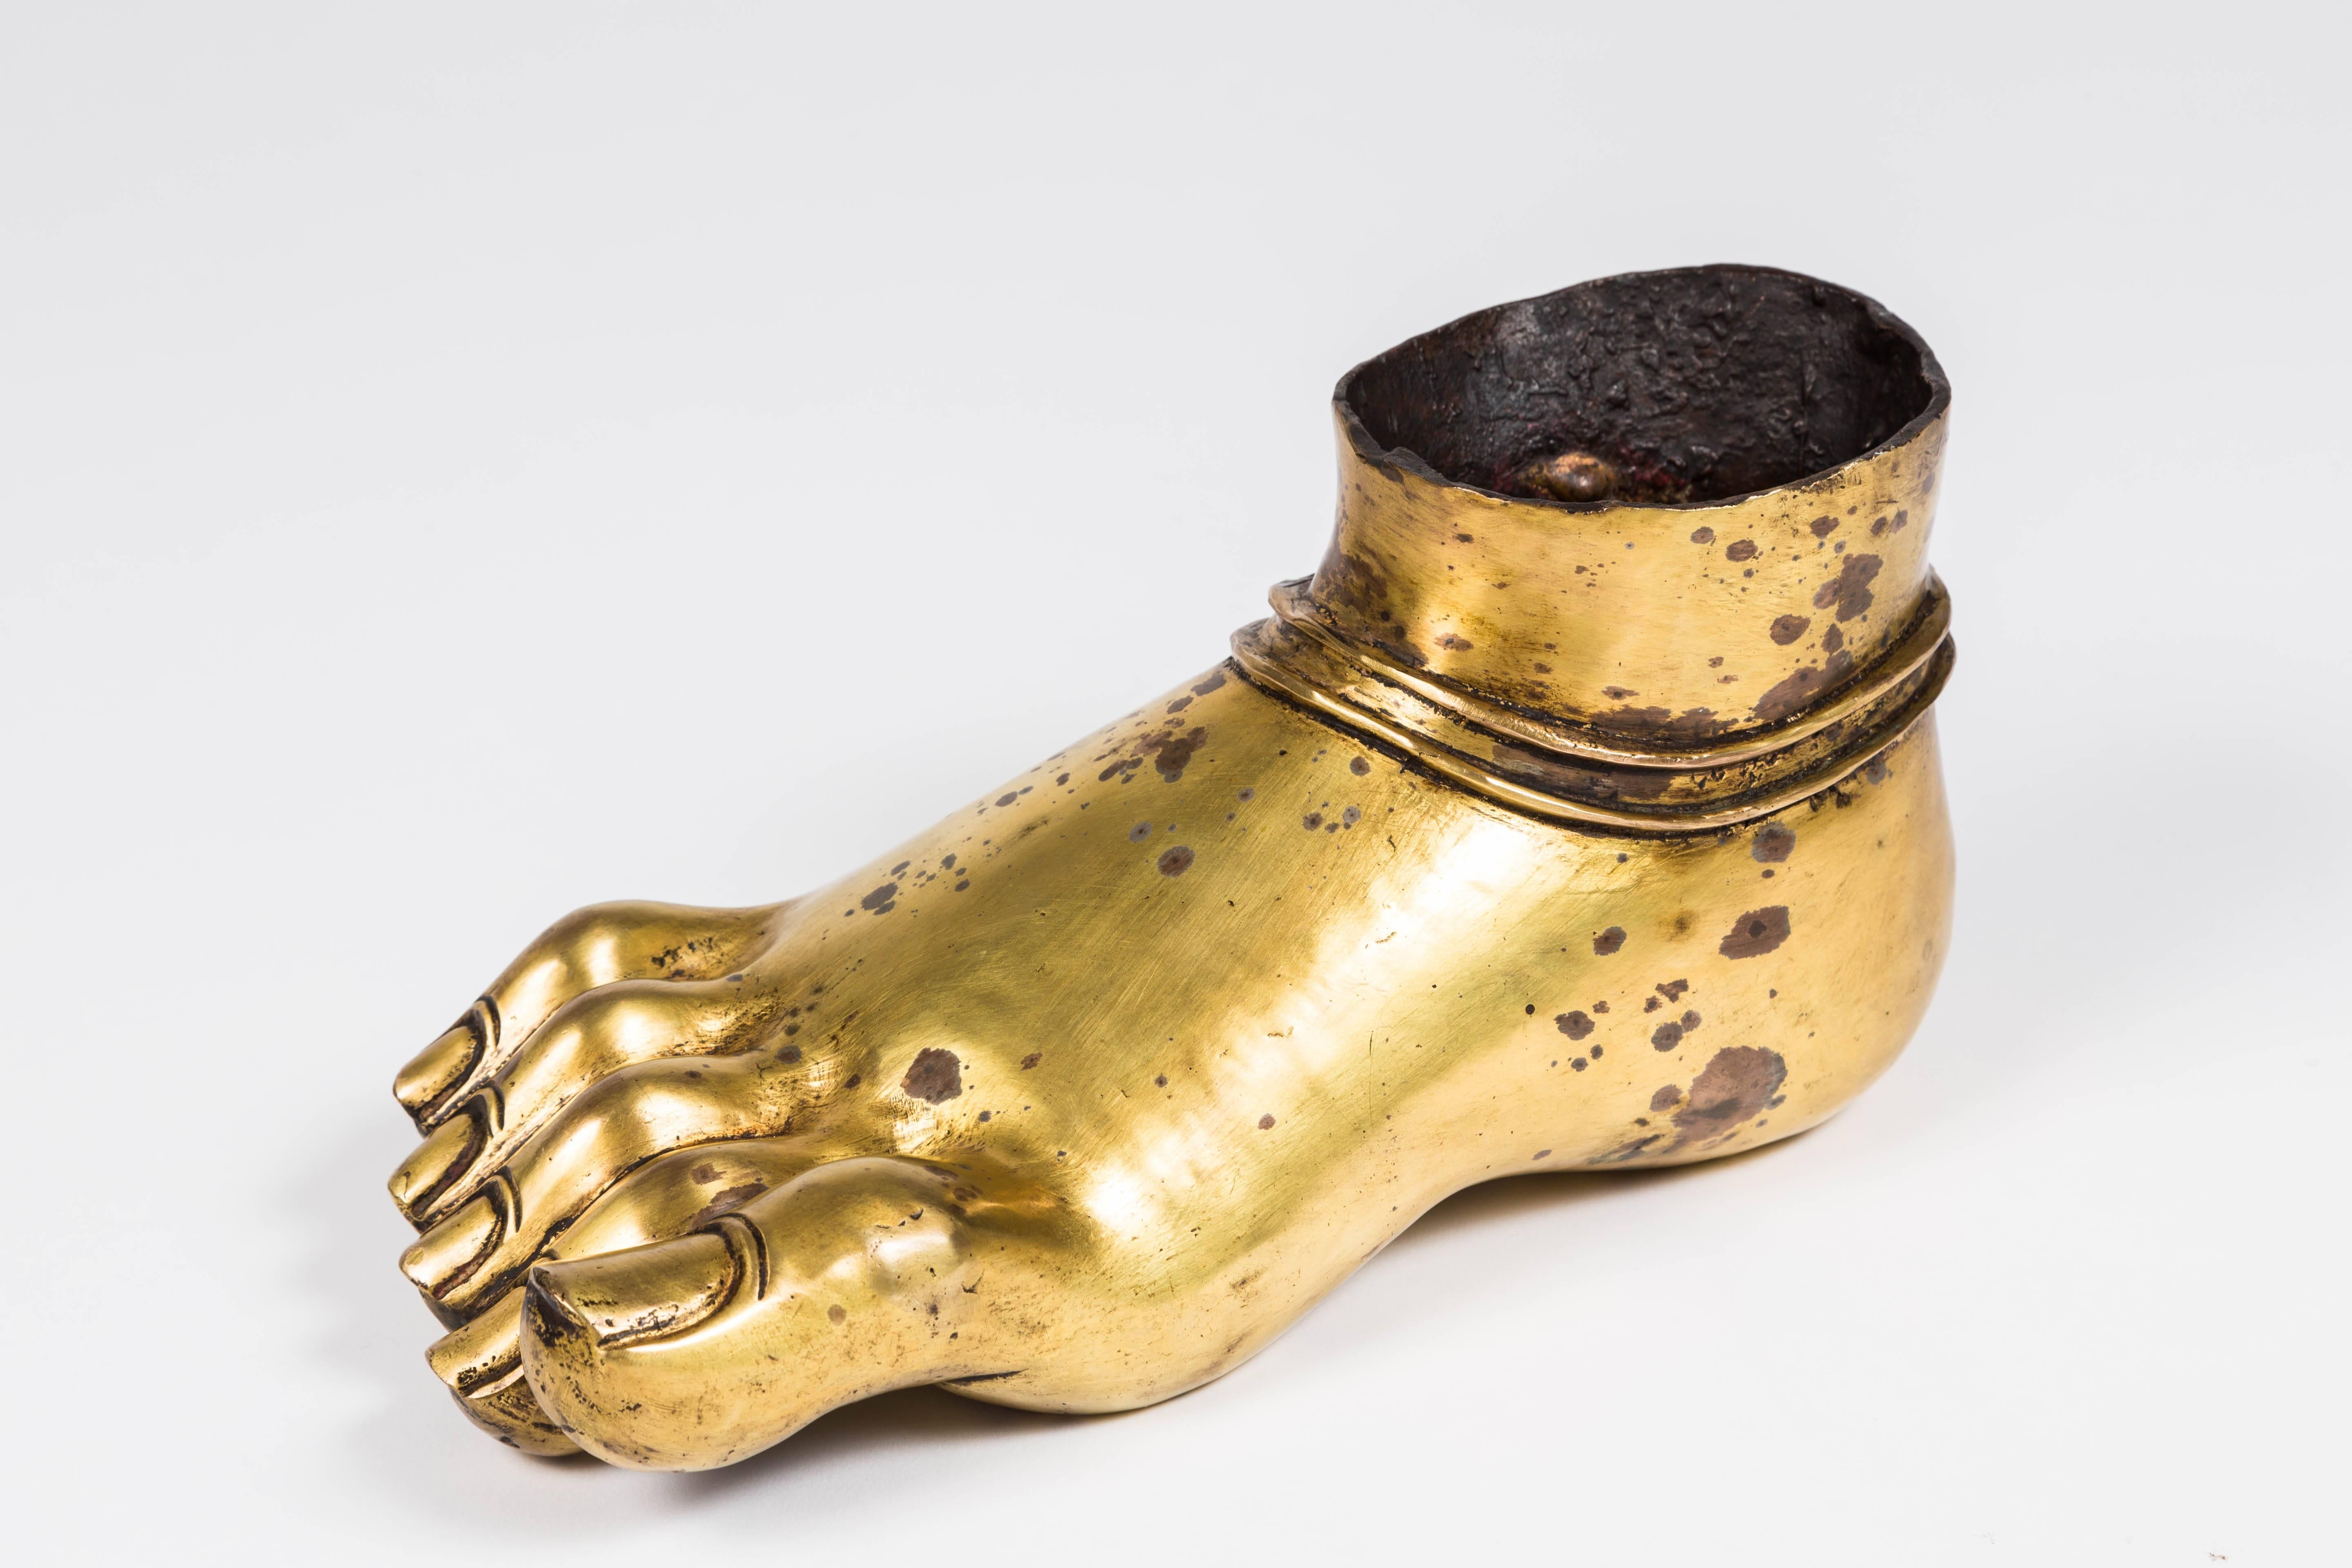 Wonderful gilt finished cast bronze Buddha's foot. This is meant to be a fragment but I believe rather that it was made to appear as such. A wonderful decorative item. Would look great sporting flowers or succulents.